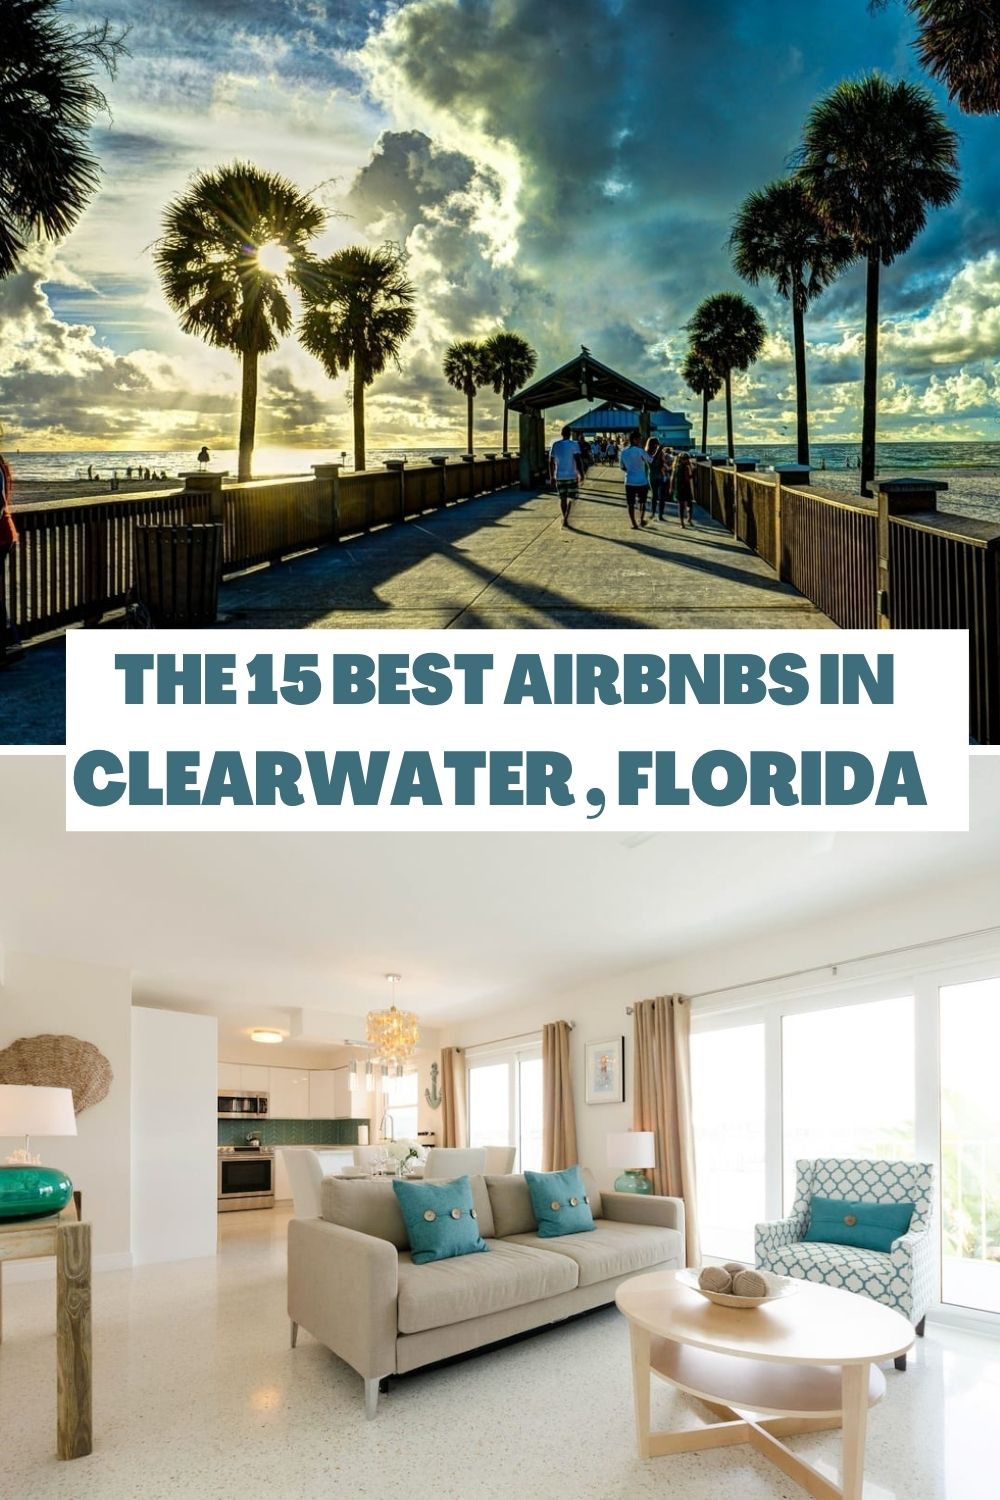 airbnb clearwater florida - pinterest